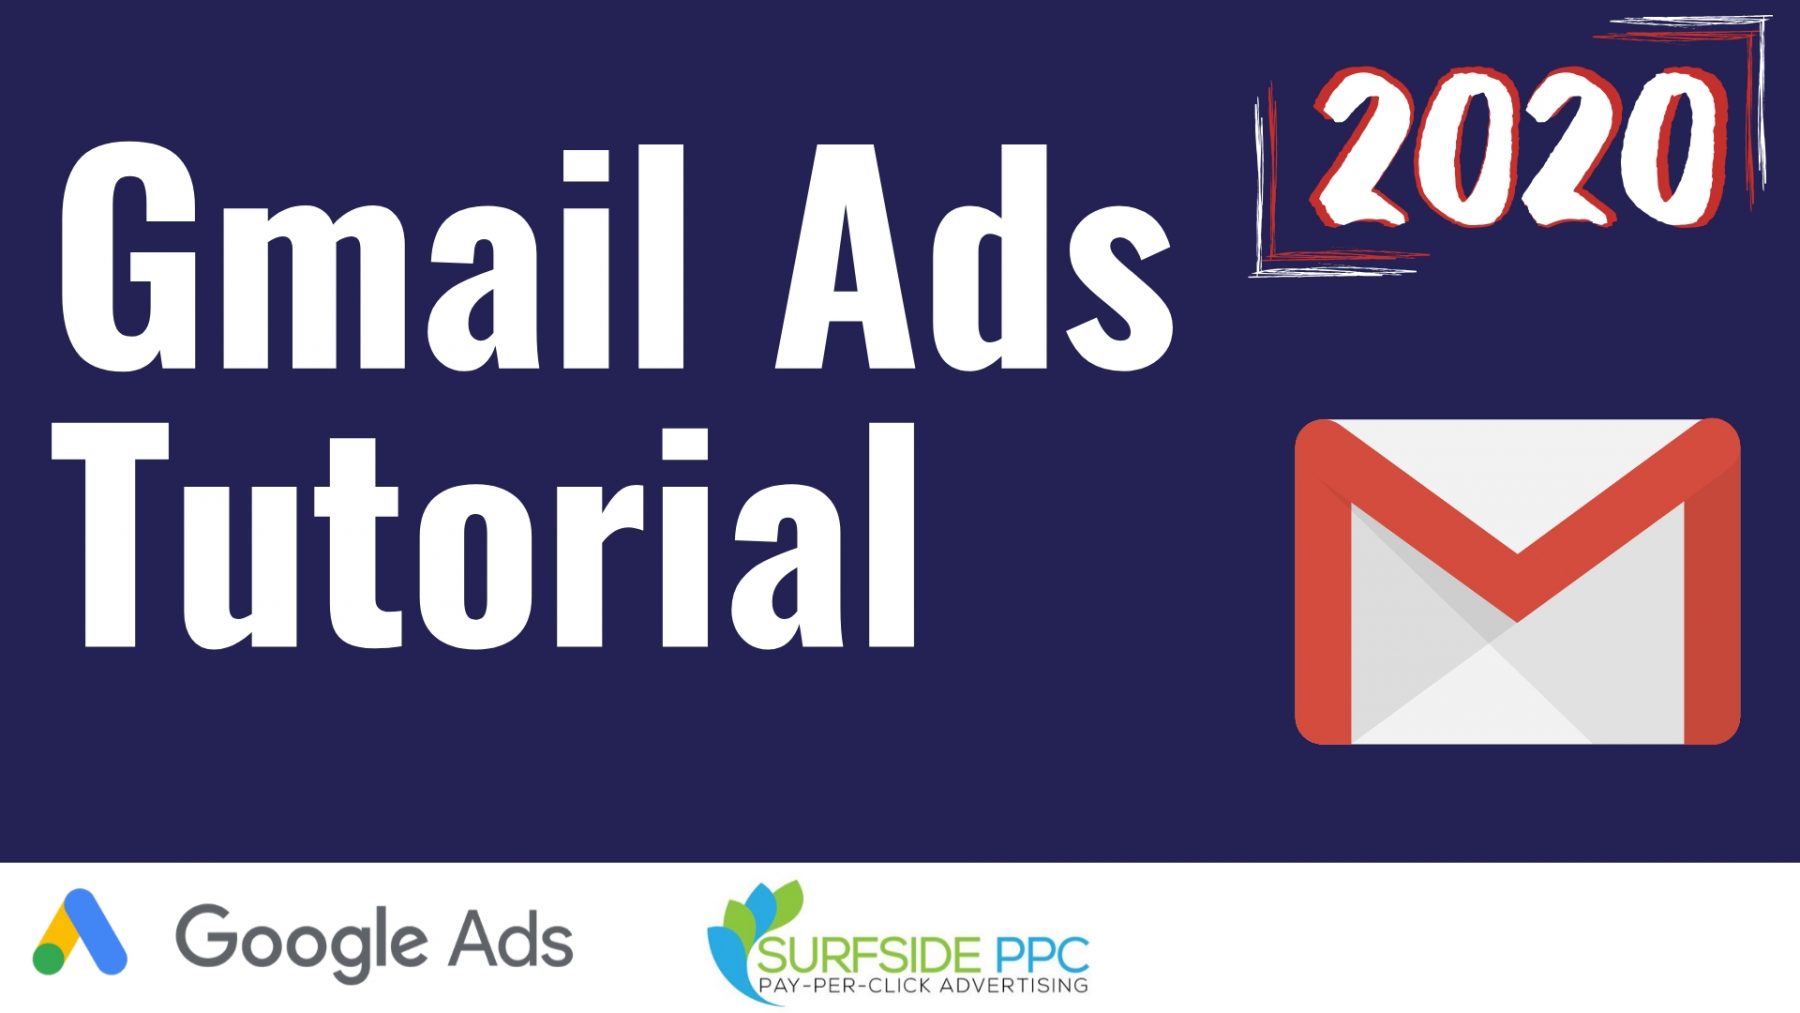 Gmail Ads: Complete Guide For 2020